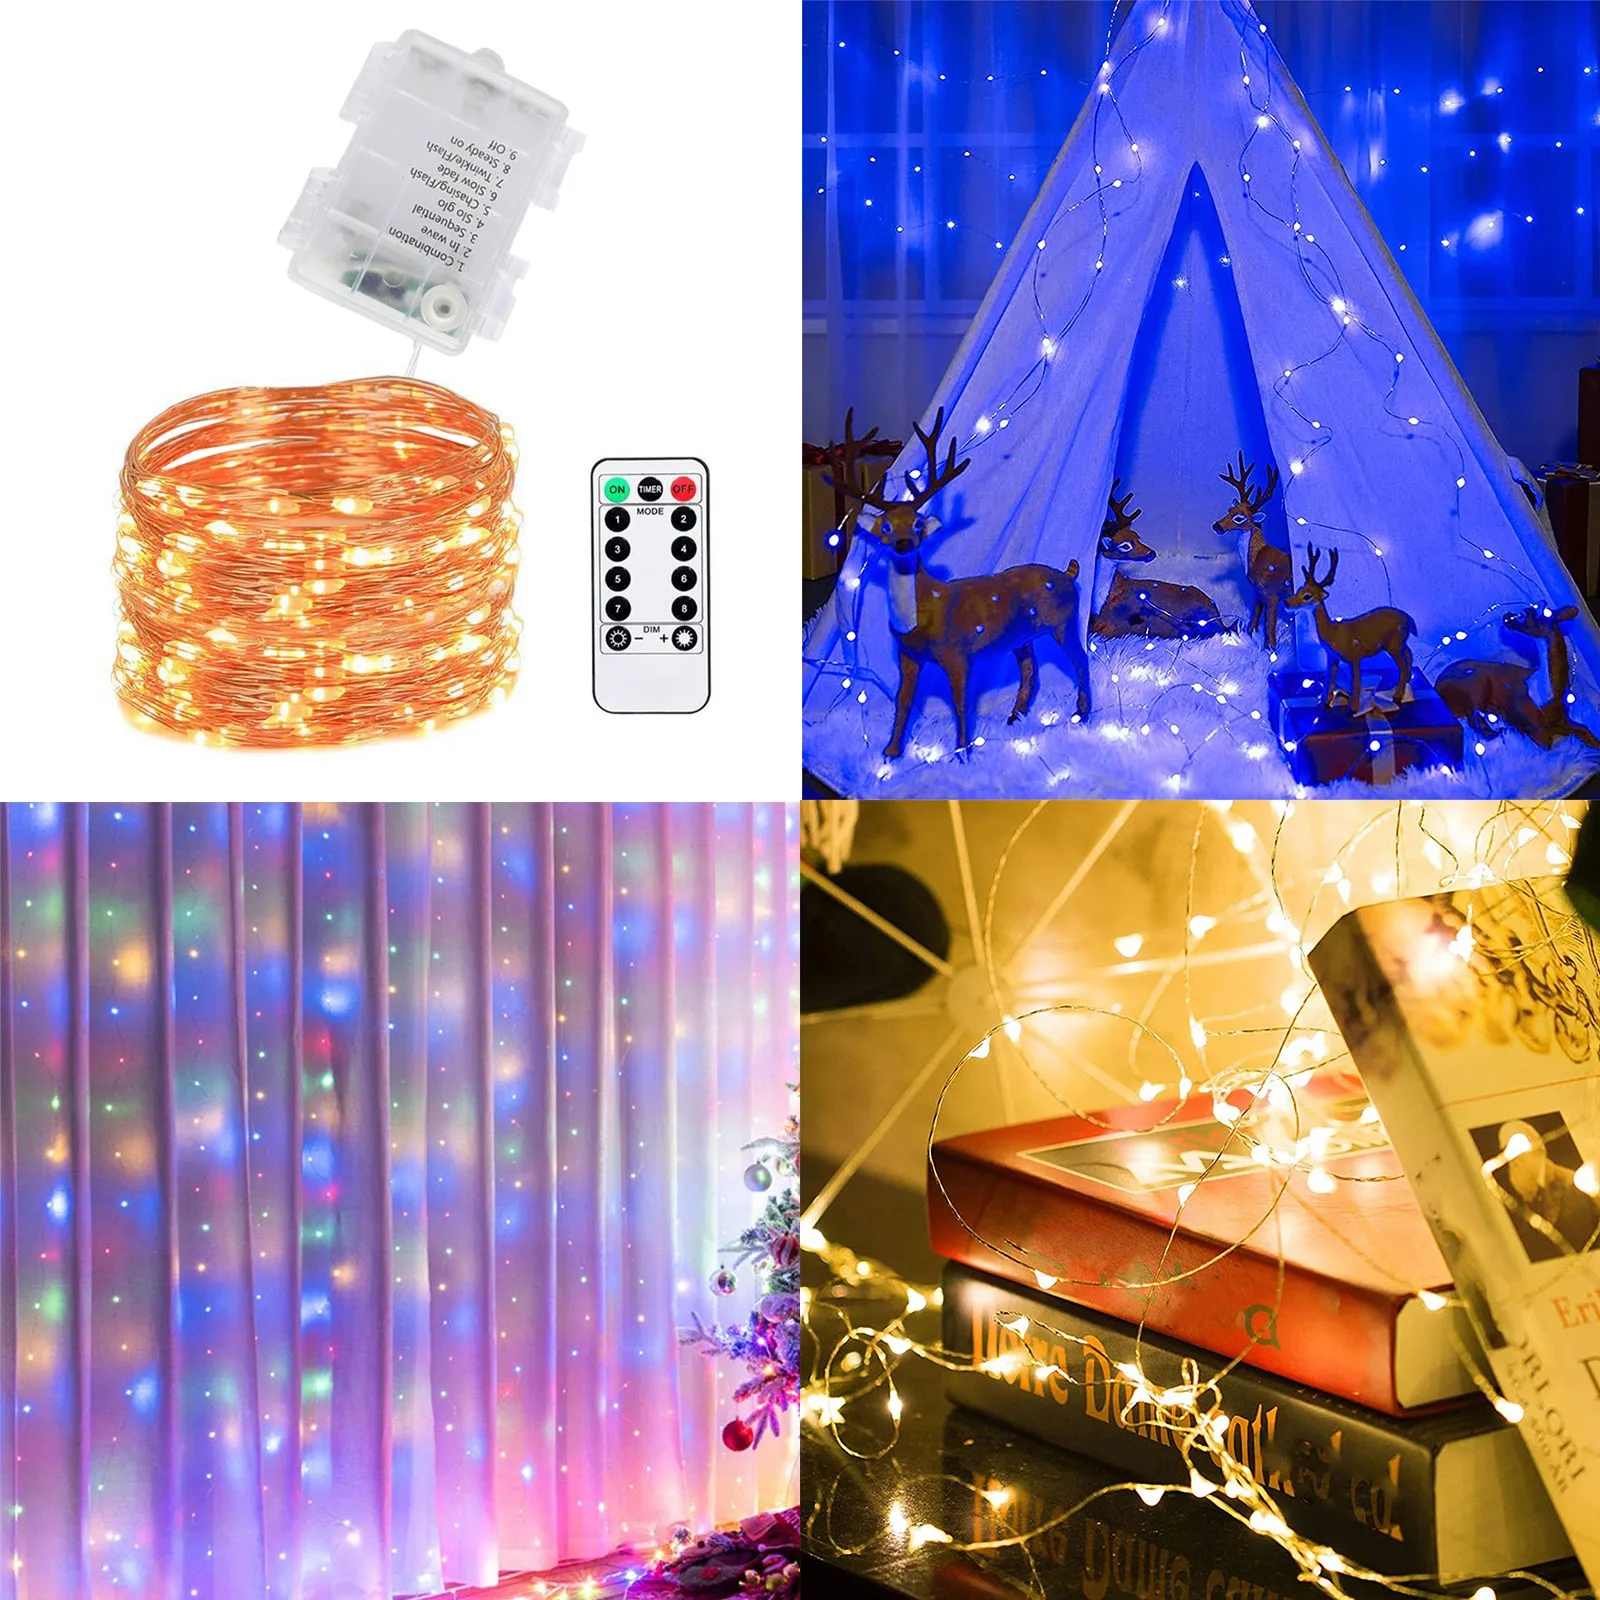 

Fairy Lights Battery Operated Led String Lights Remote Control Timer Twinkle String Lights 8 Modes 10m Firefly Lights